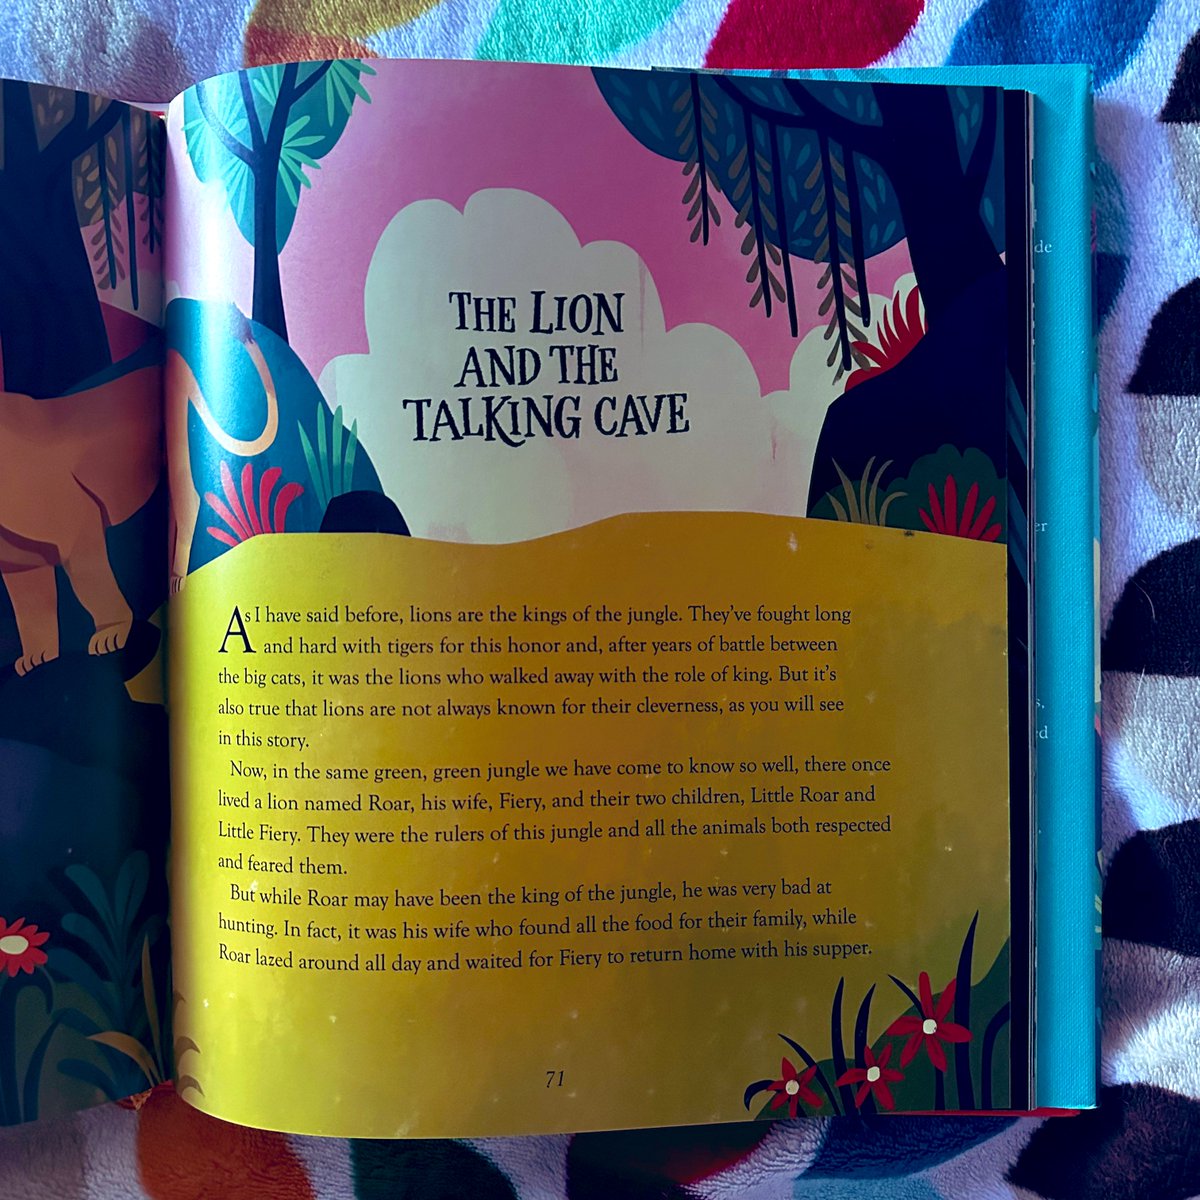 I am glad I pre-ordered this new children’s book written by Nikita Gill @nktgill Its arrival today was a welcomed surprise. I cannot wait to read these stories to my grandchildren and discuss the gorgeous designs by @chaayaprabhat #books #childrensbooks